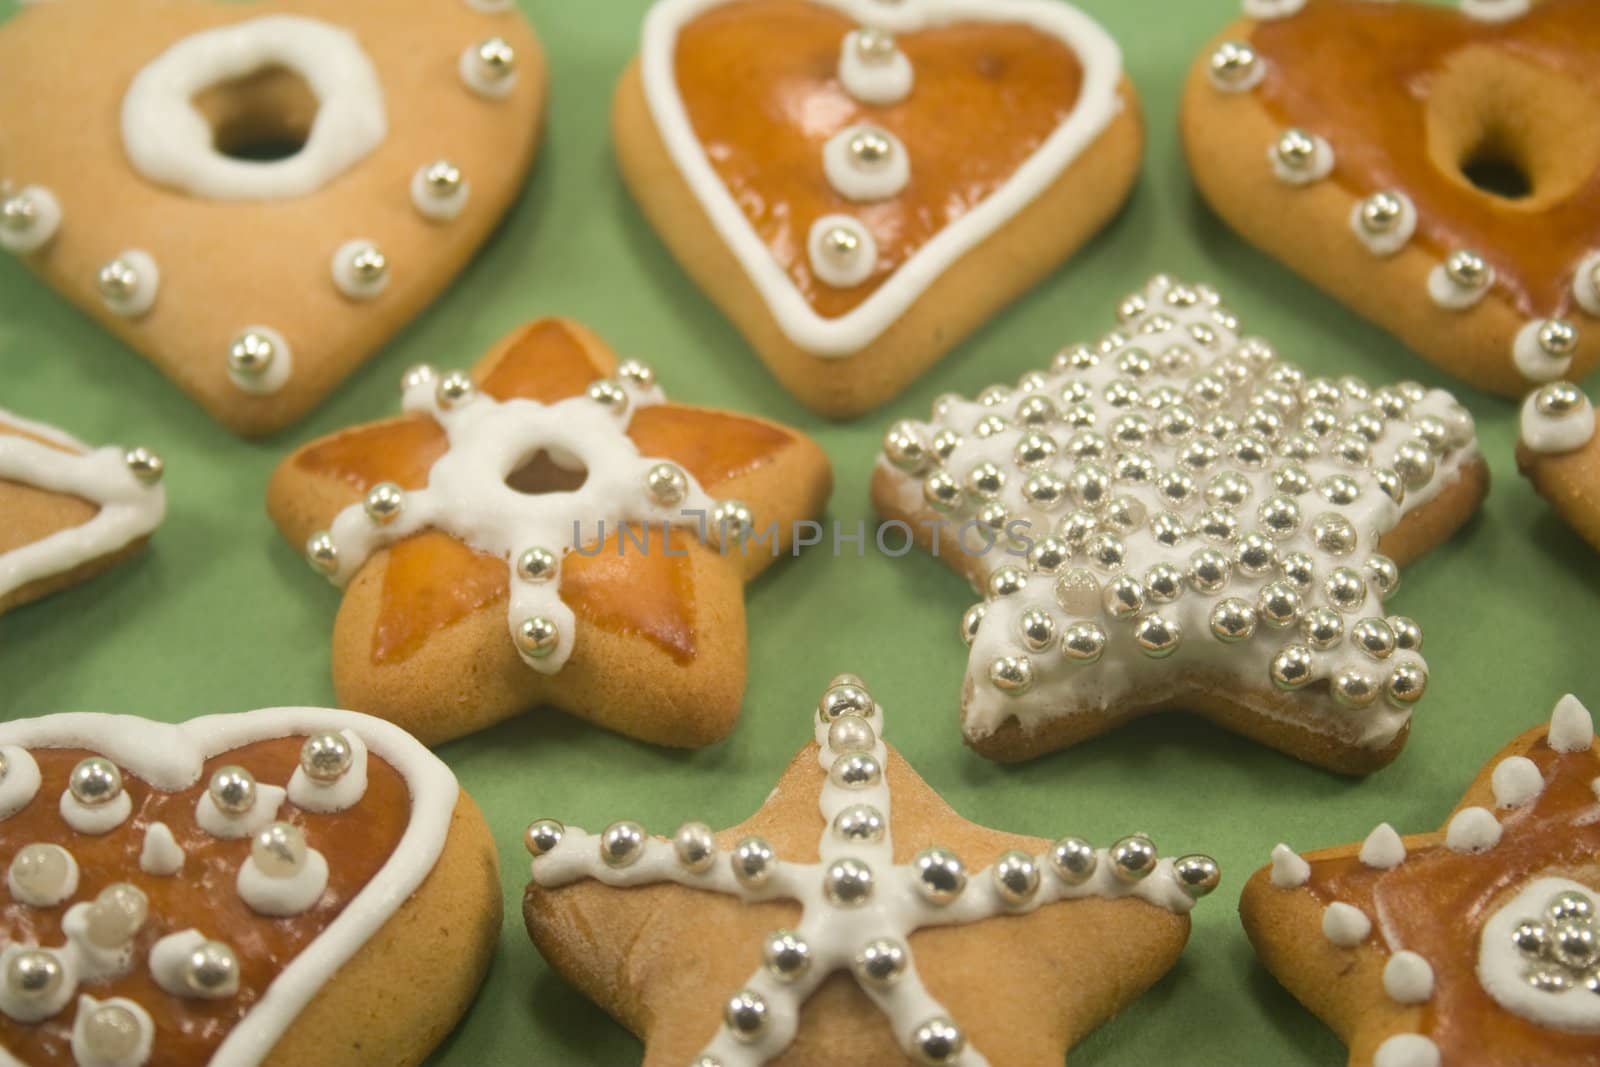 Decorated star and heart cookies on green paper